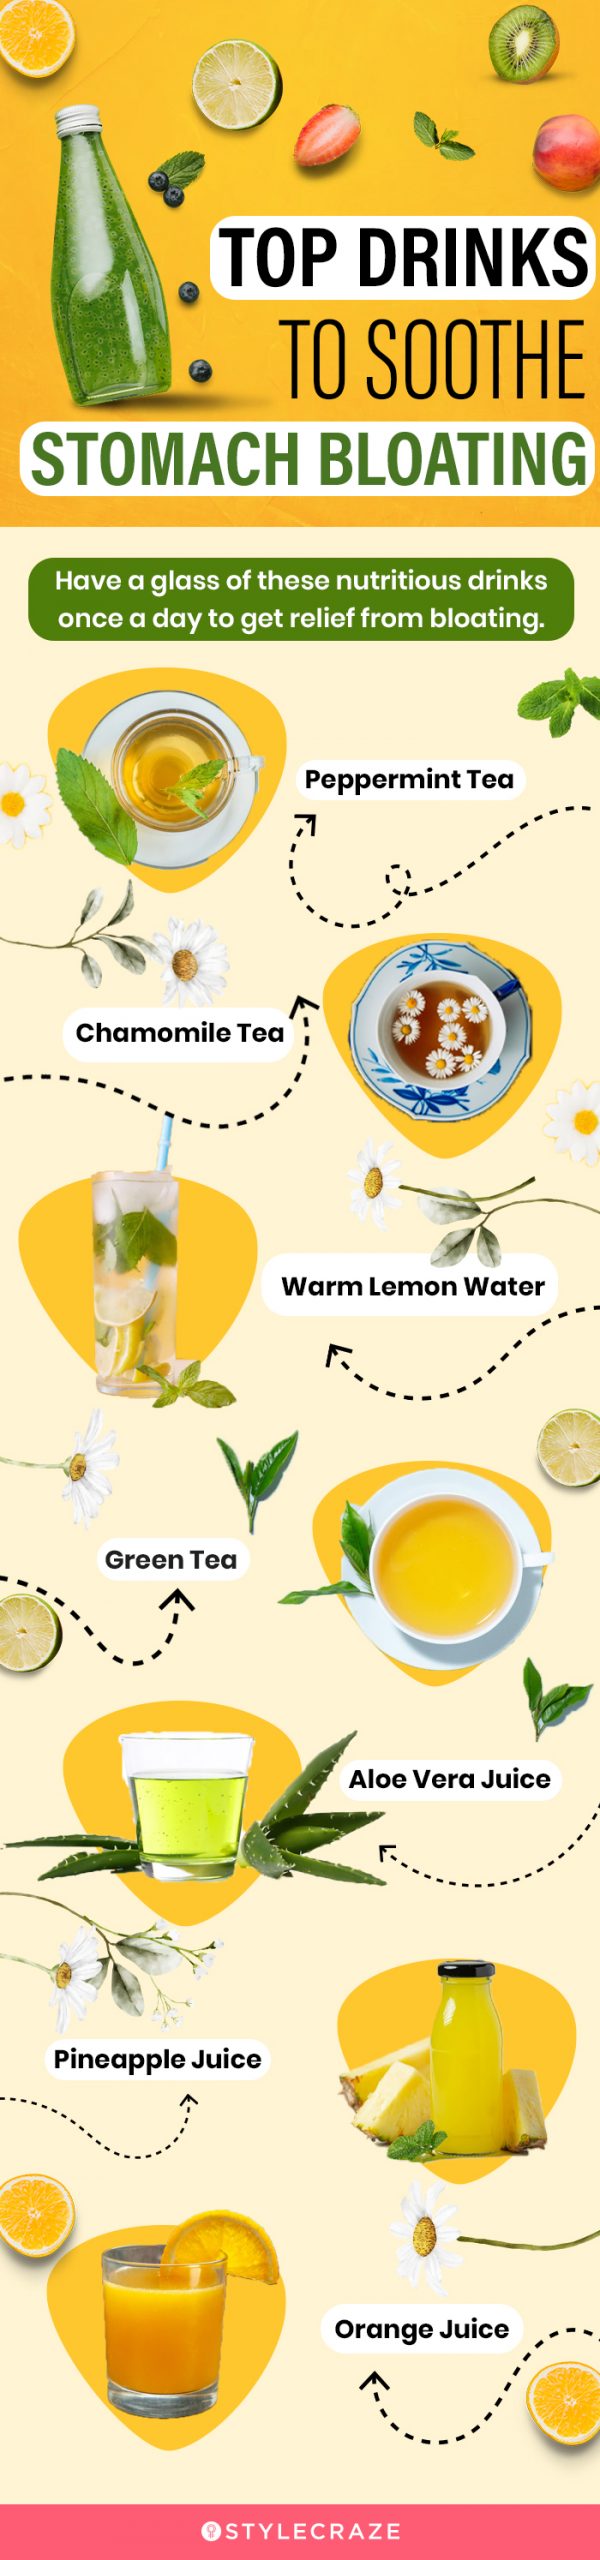 top drinks to soothe stomach bloating (infographic)